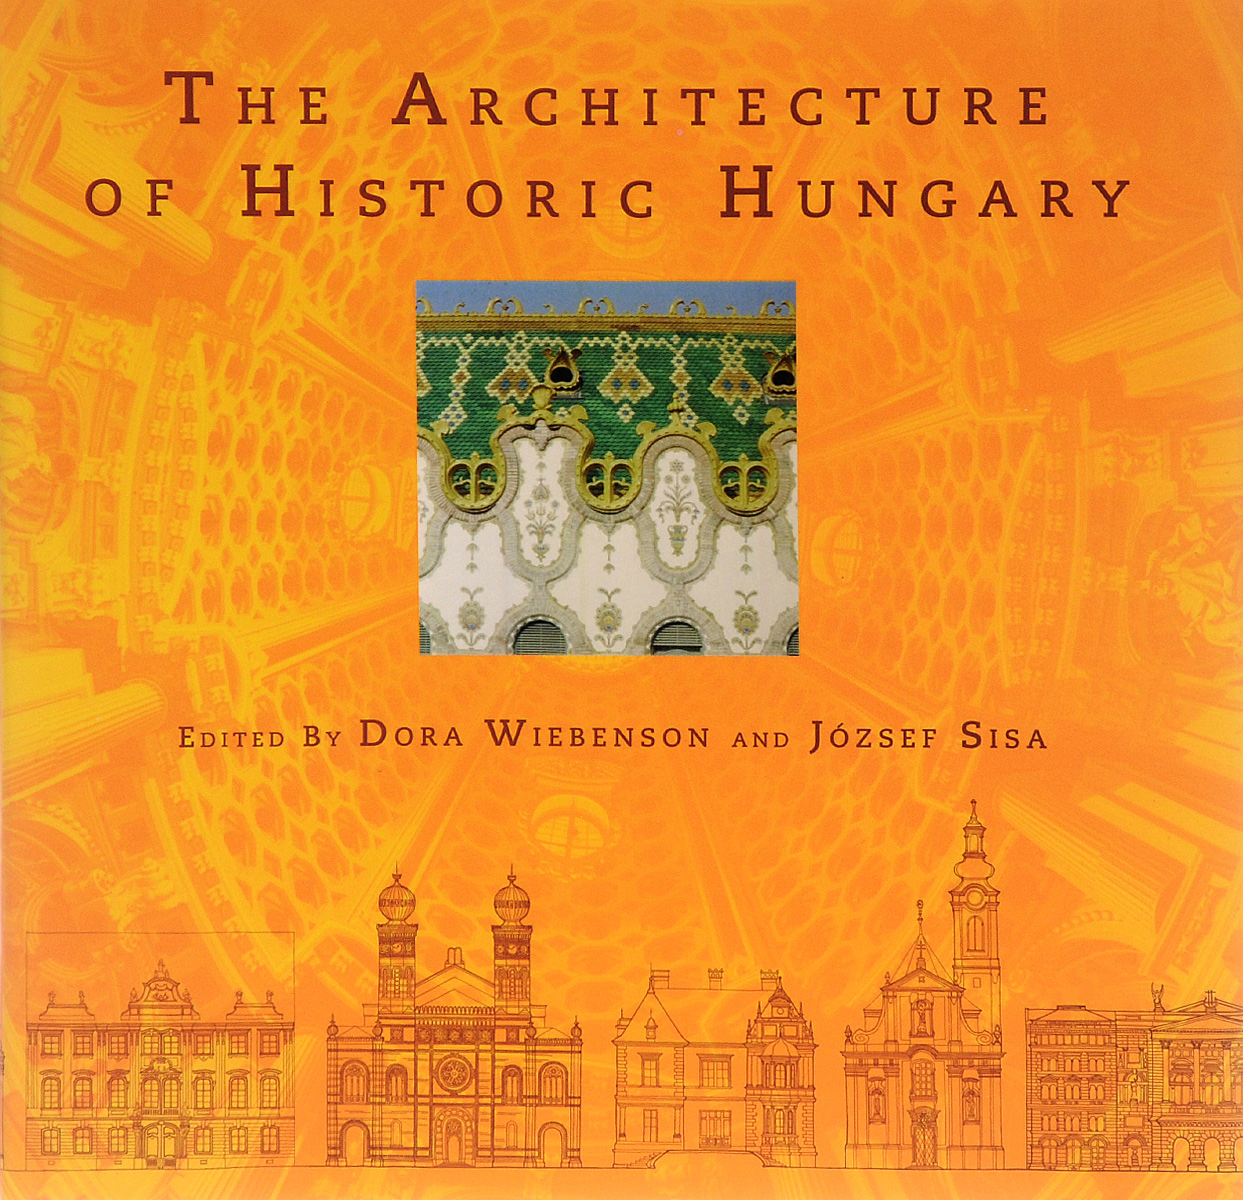 The Architecture of Historic Hungary